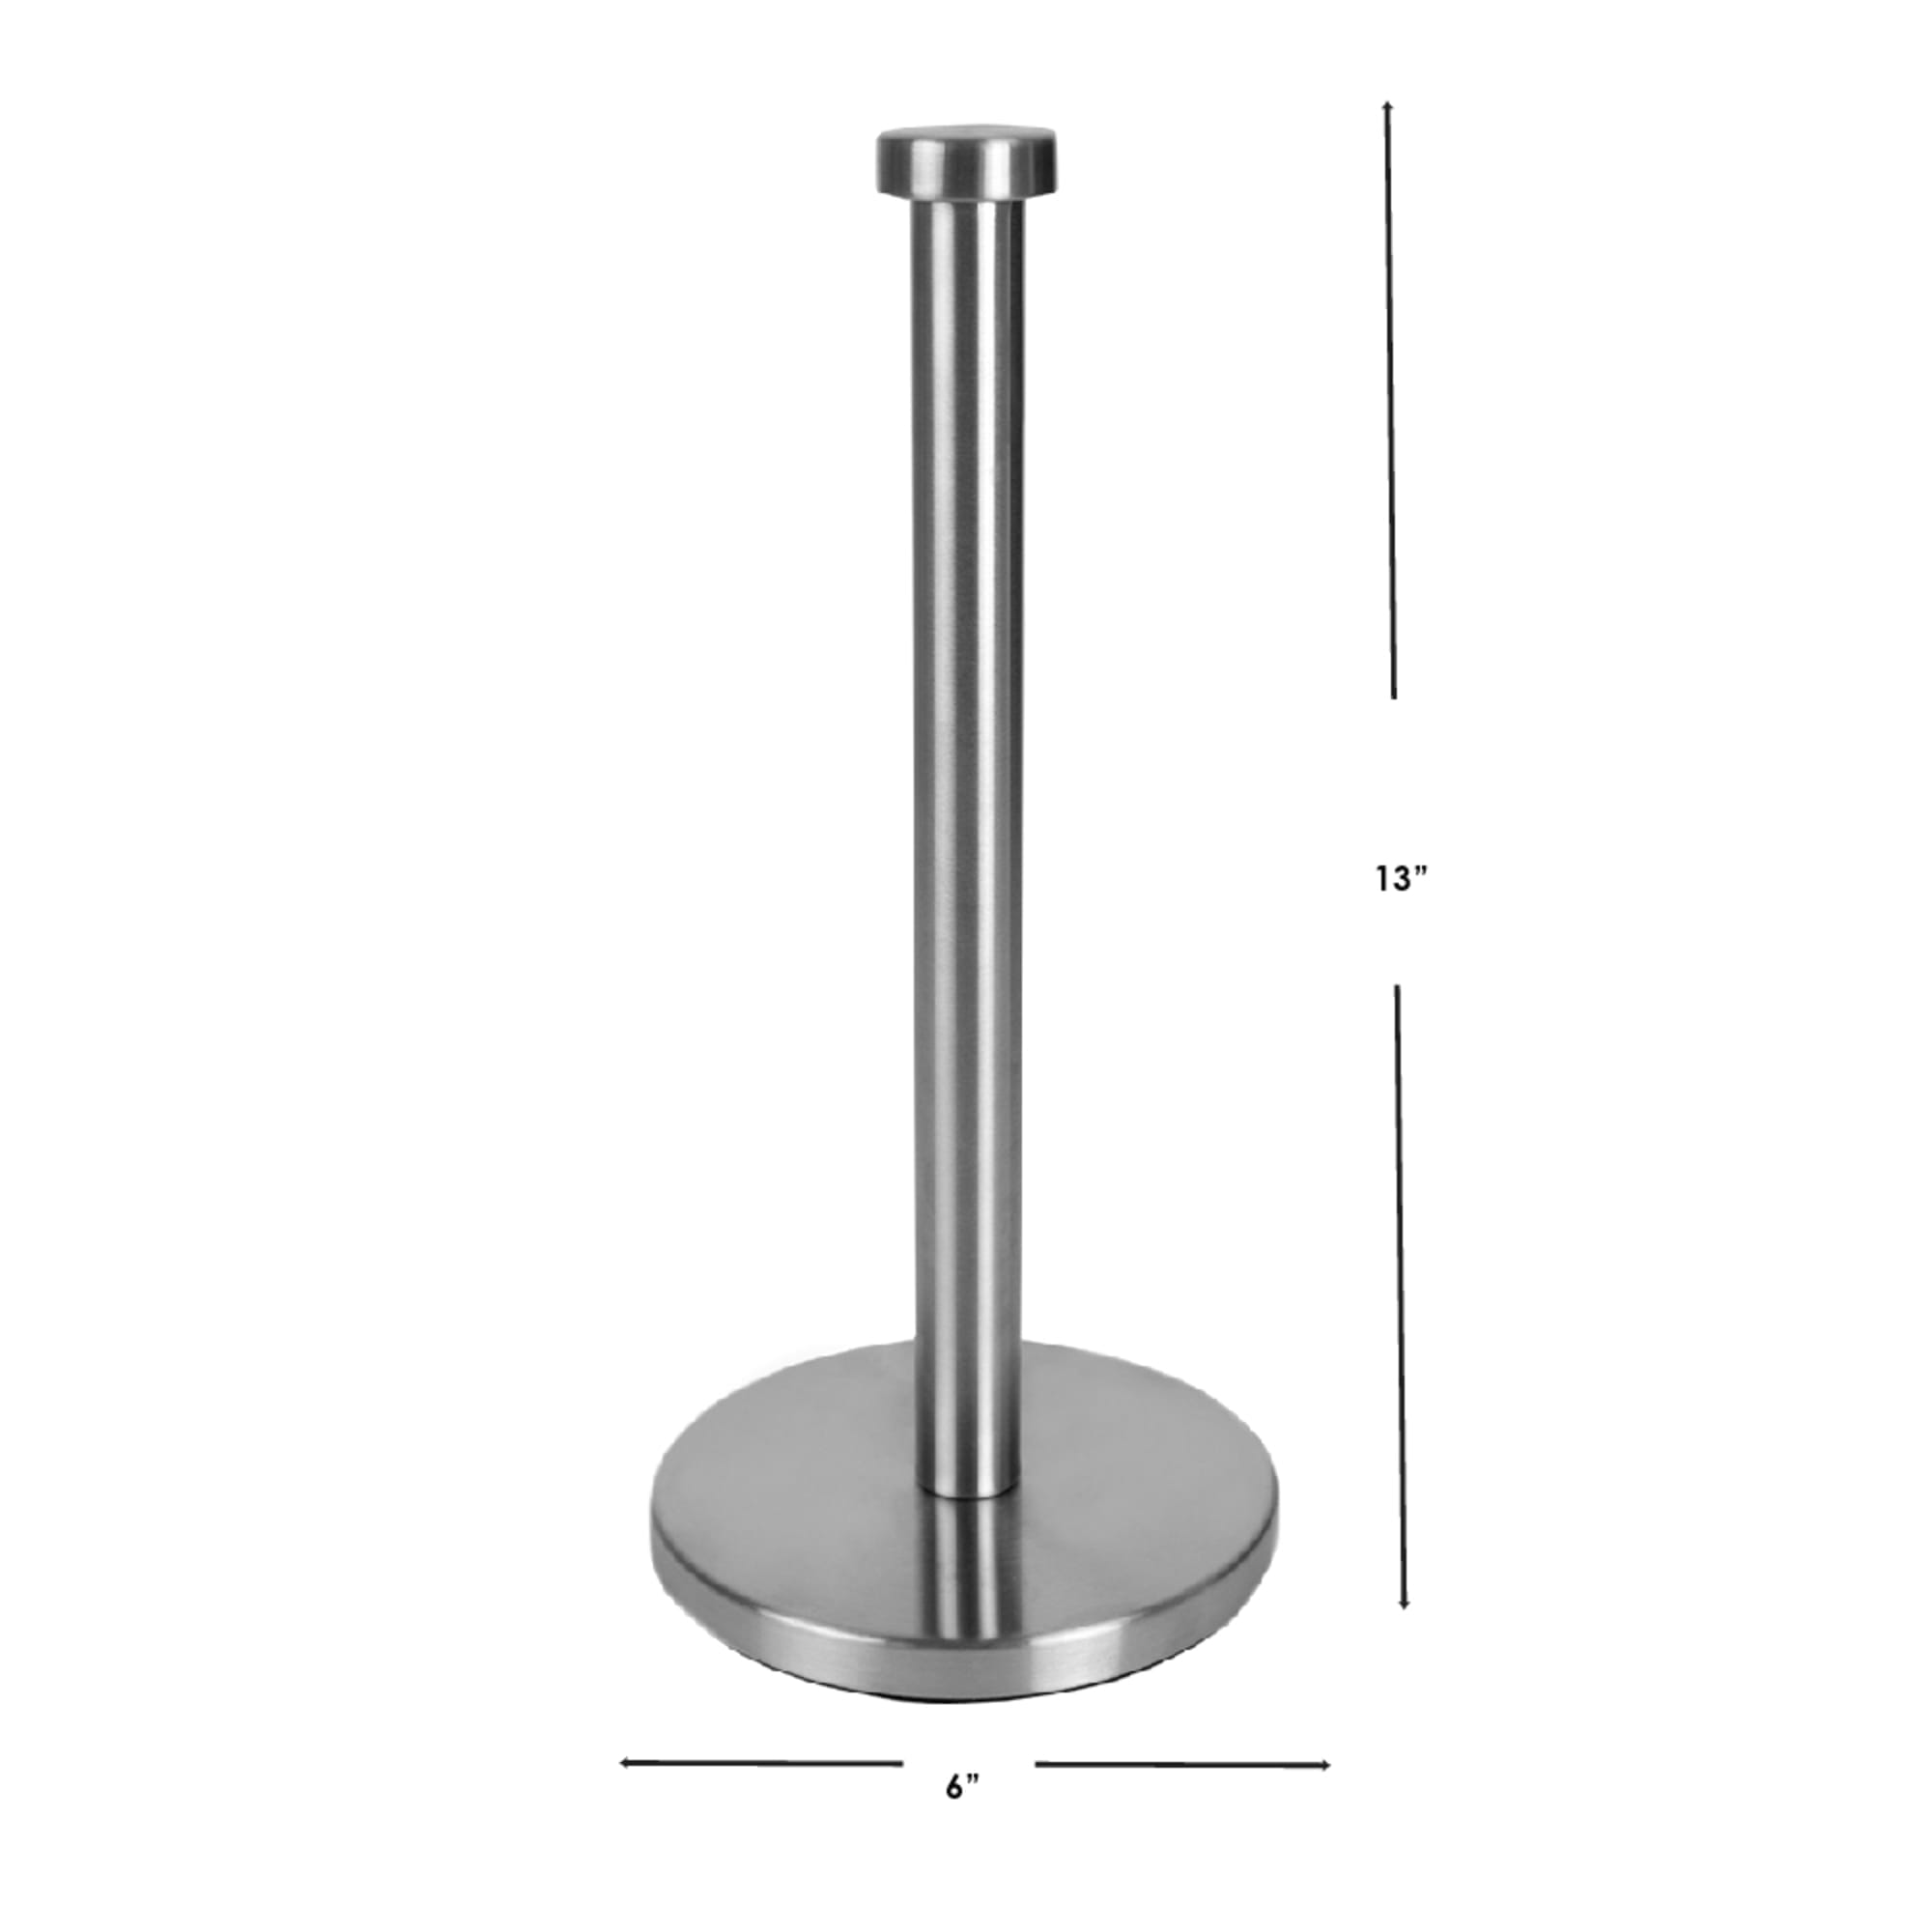 Home Basics Free Standing Paper Towel Holder with Weighted Base, Silver $5.00 EACH, CASE PACK OF 6